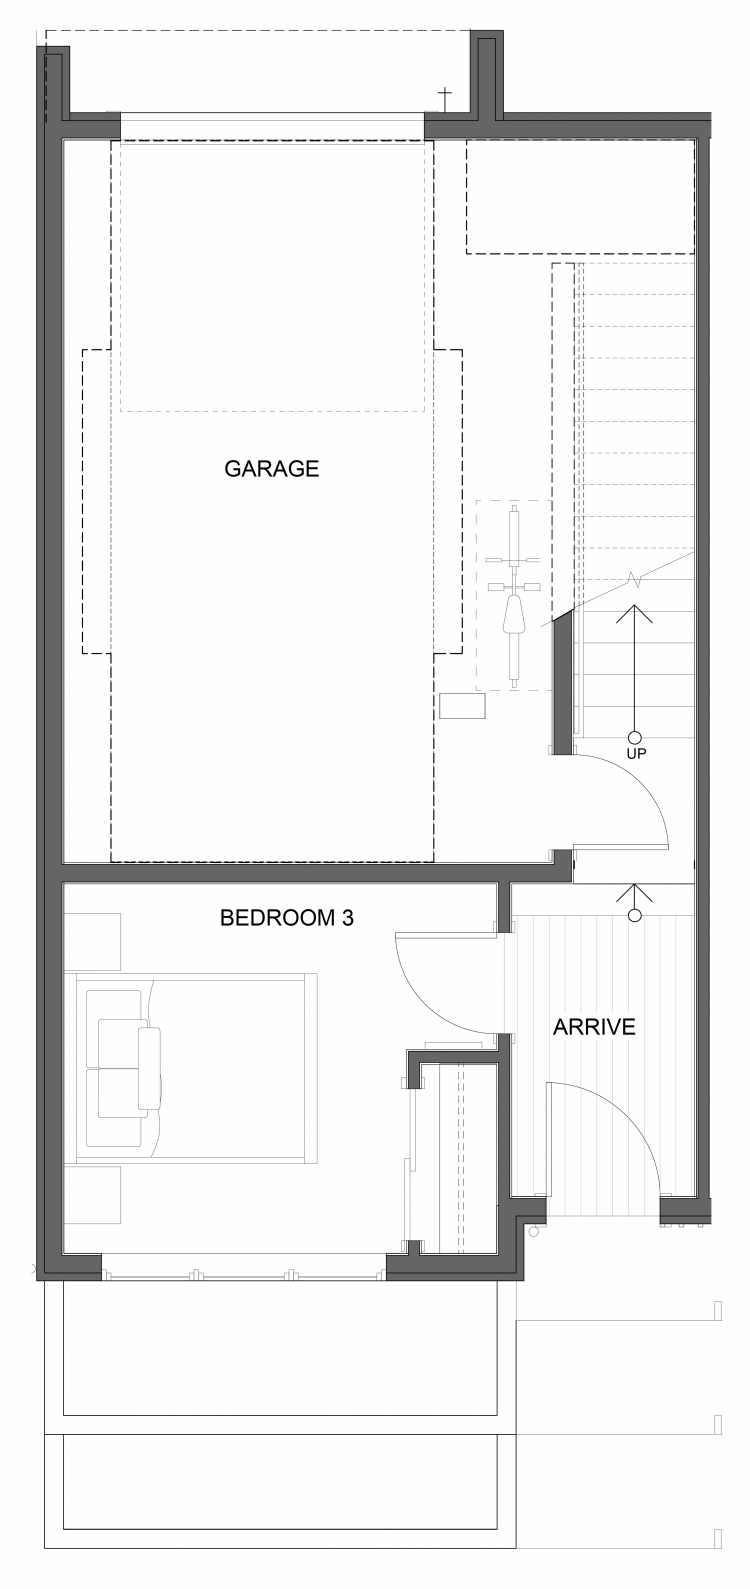 First Floor Plan of 1734B NW 62nd St, One of the Taran Townhomes in Ballard